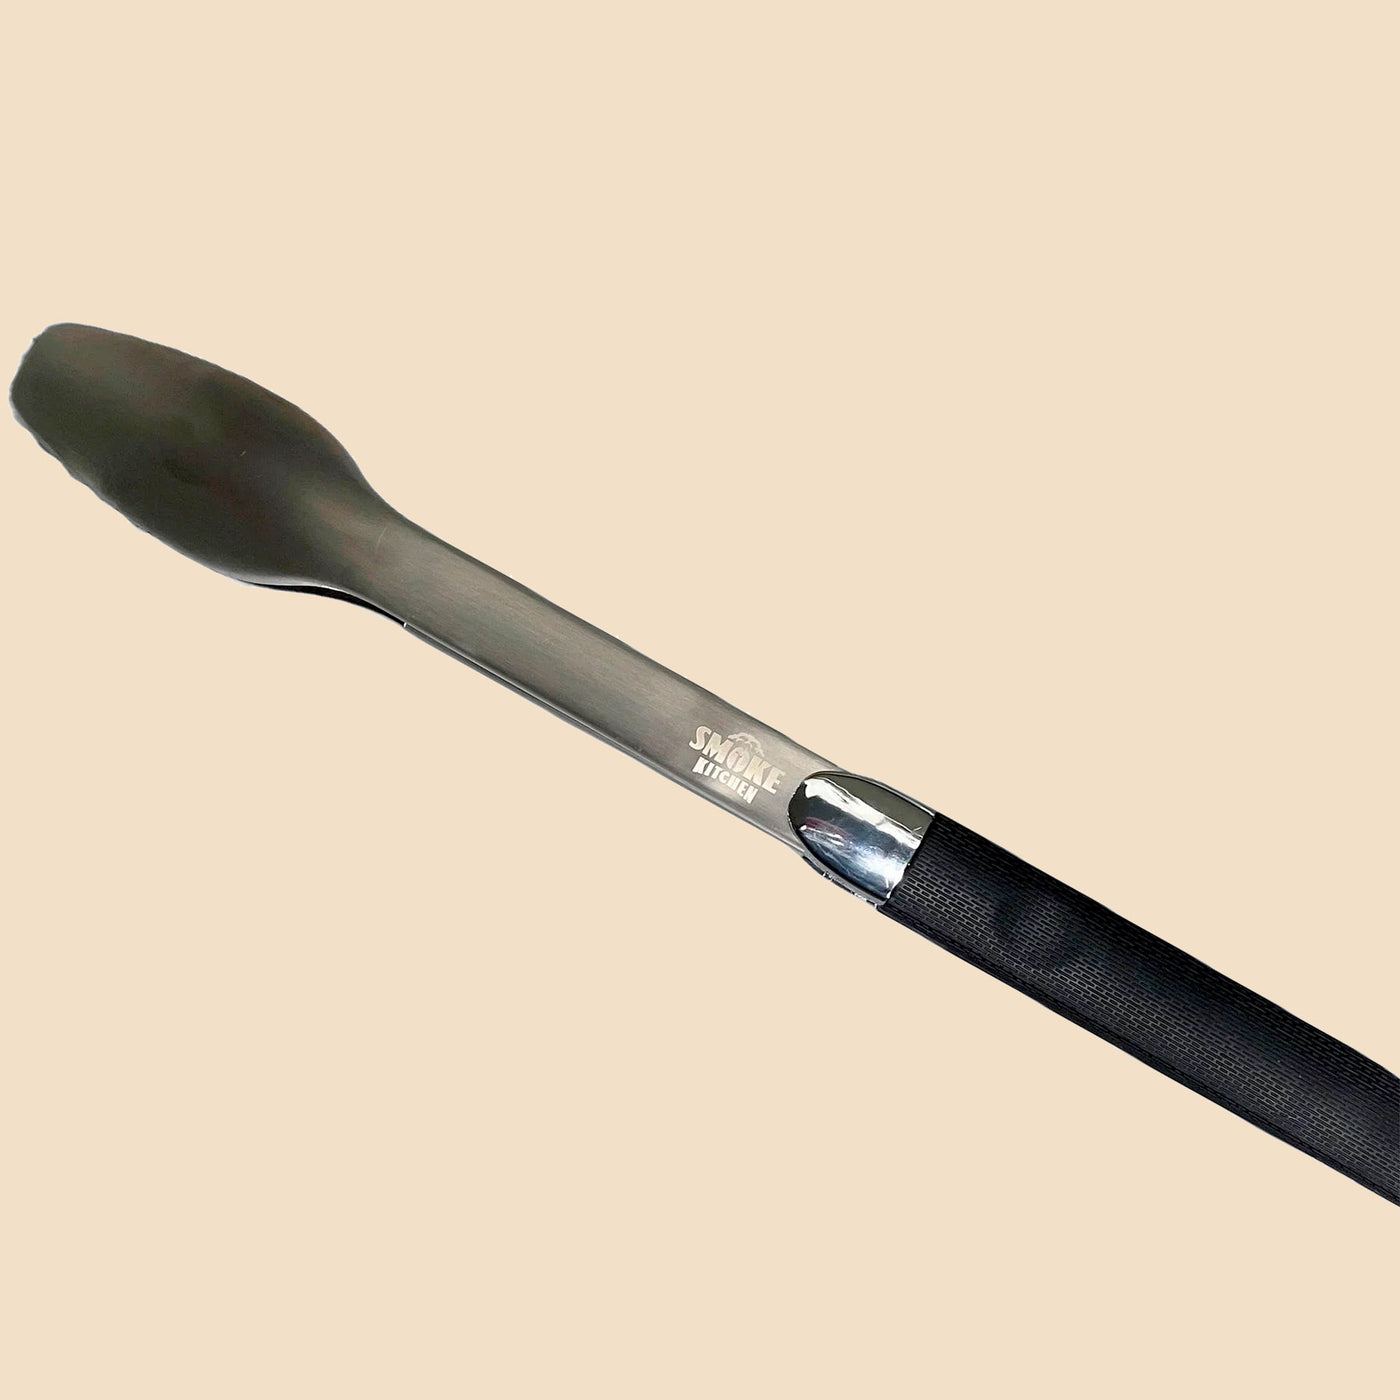 18" Barbecue Tongs